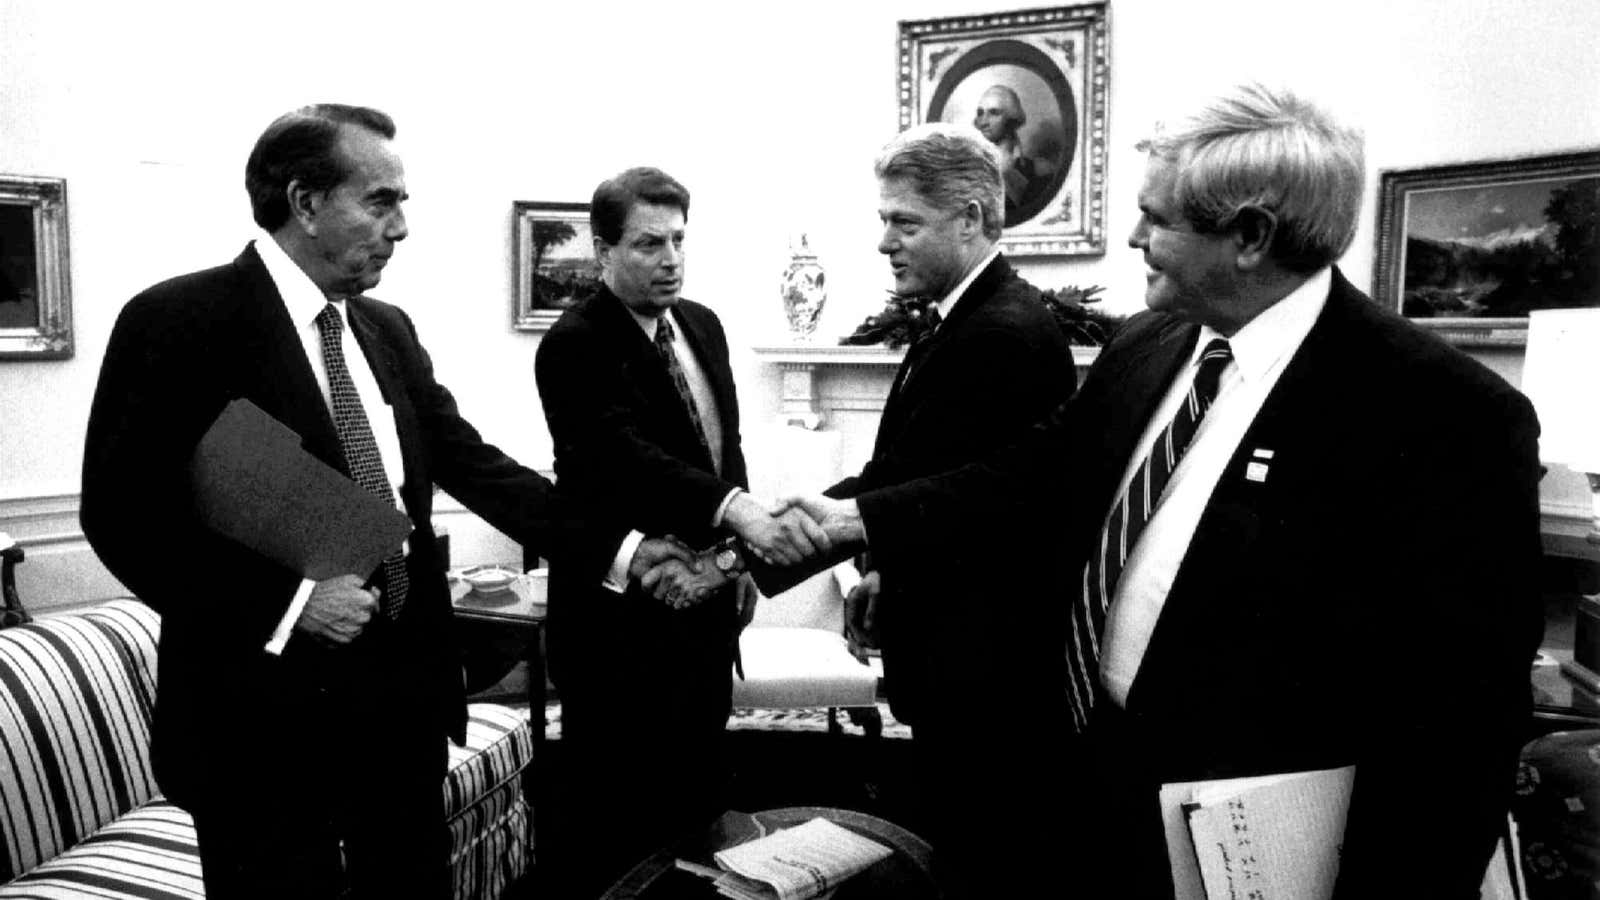 Republican Senate leader Bob Dole, Democratic Vice President Al Gore, Democratic President Bill Clinton and Republican Speaker of the House Newt Gingrich perform a complicated fiscal handshake. Those were the days…